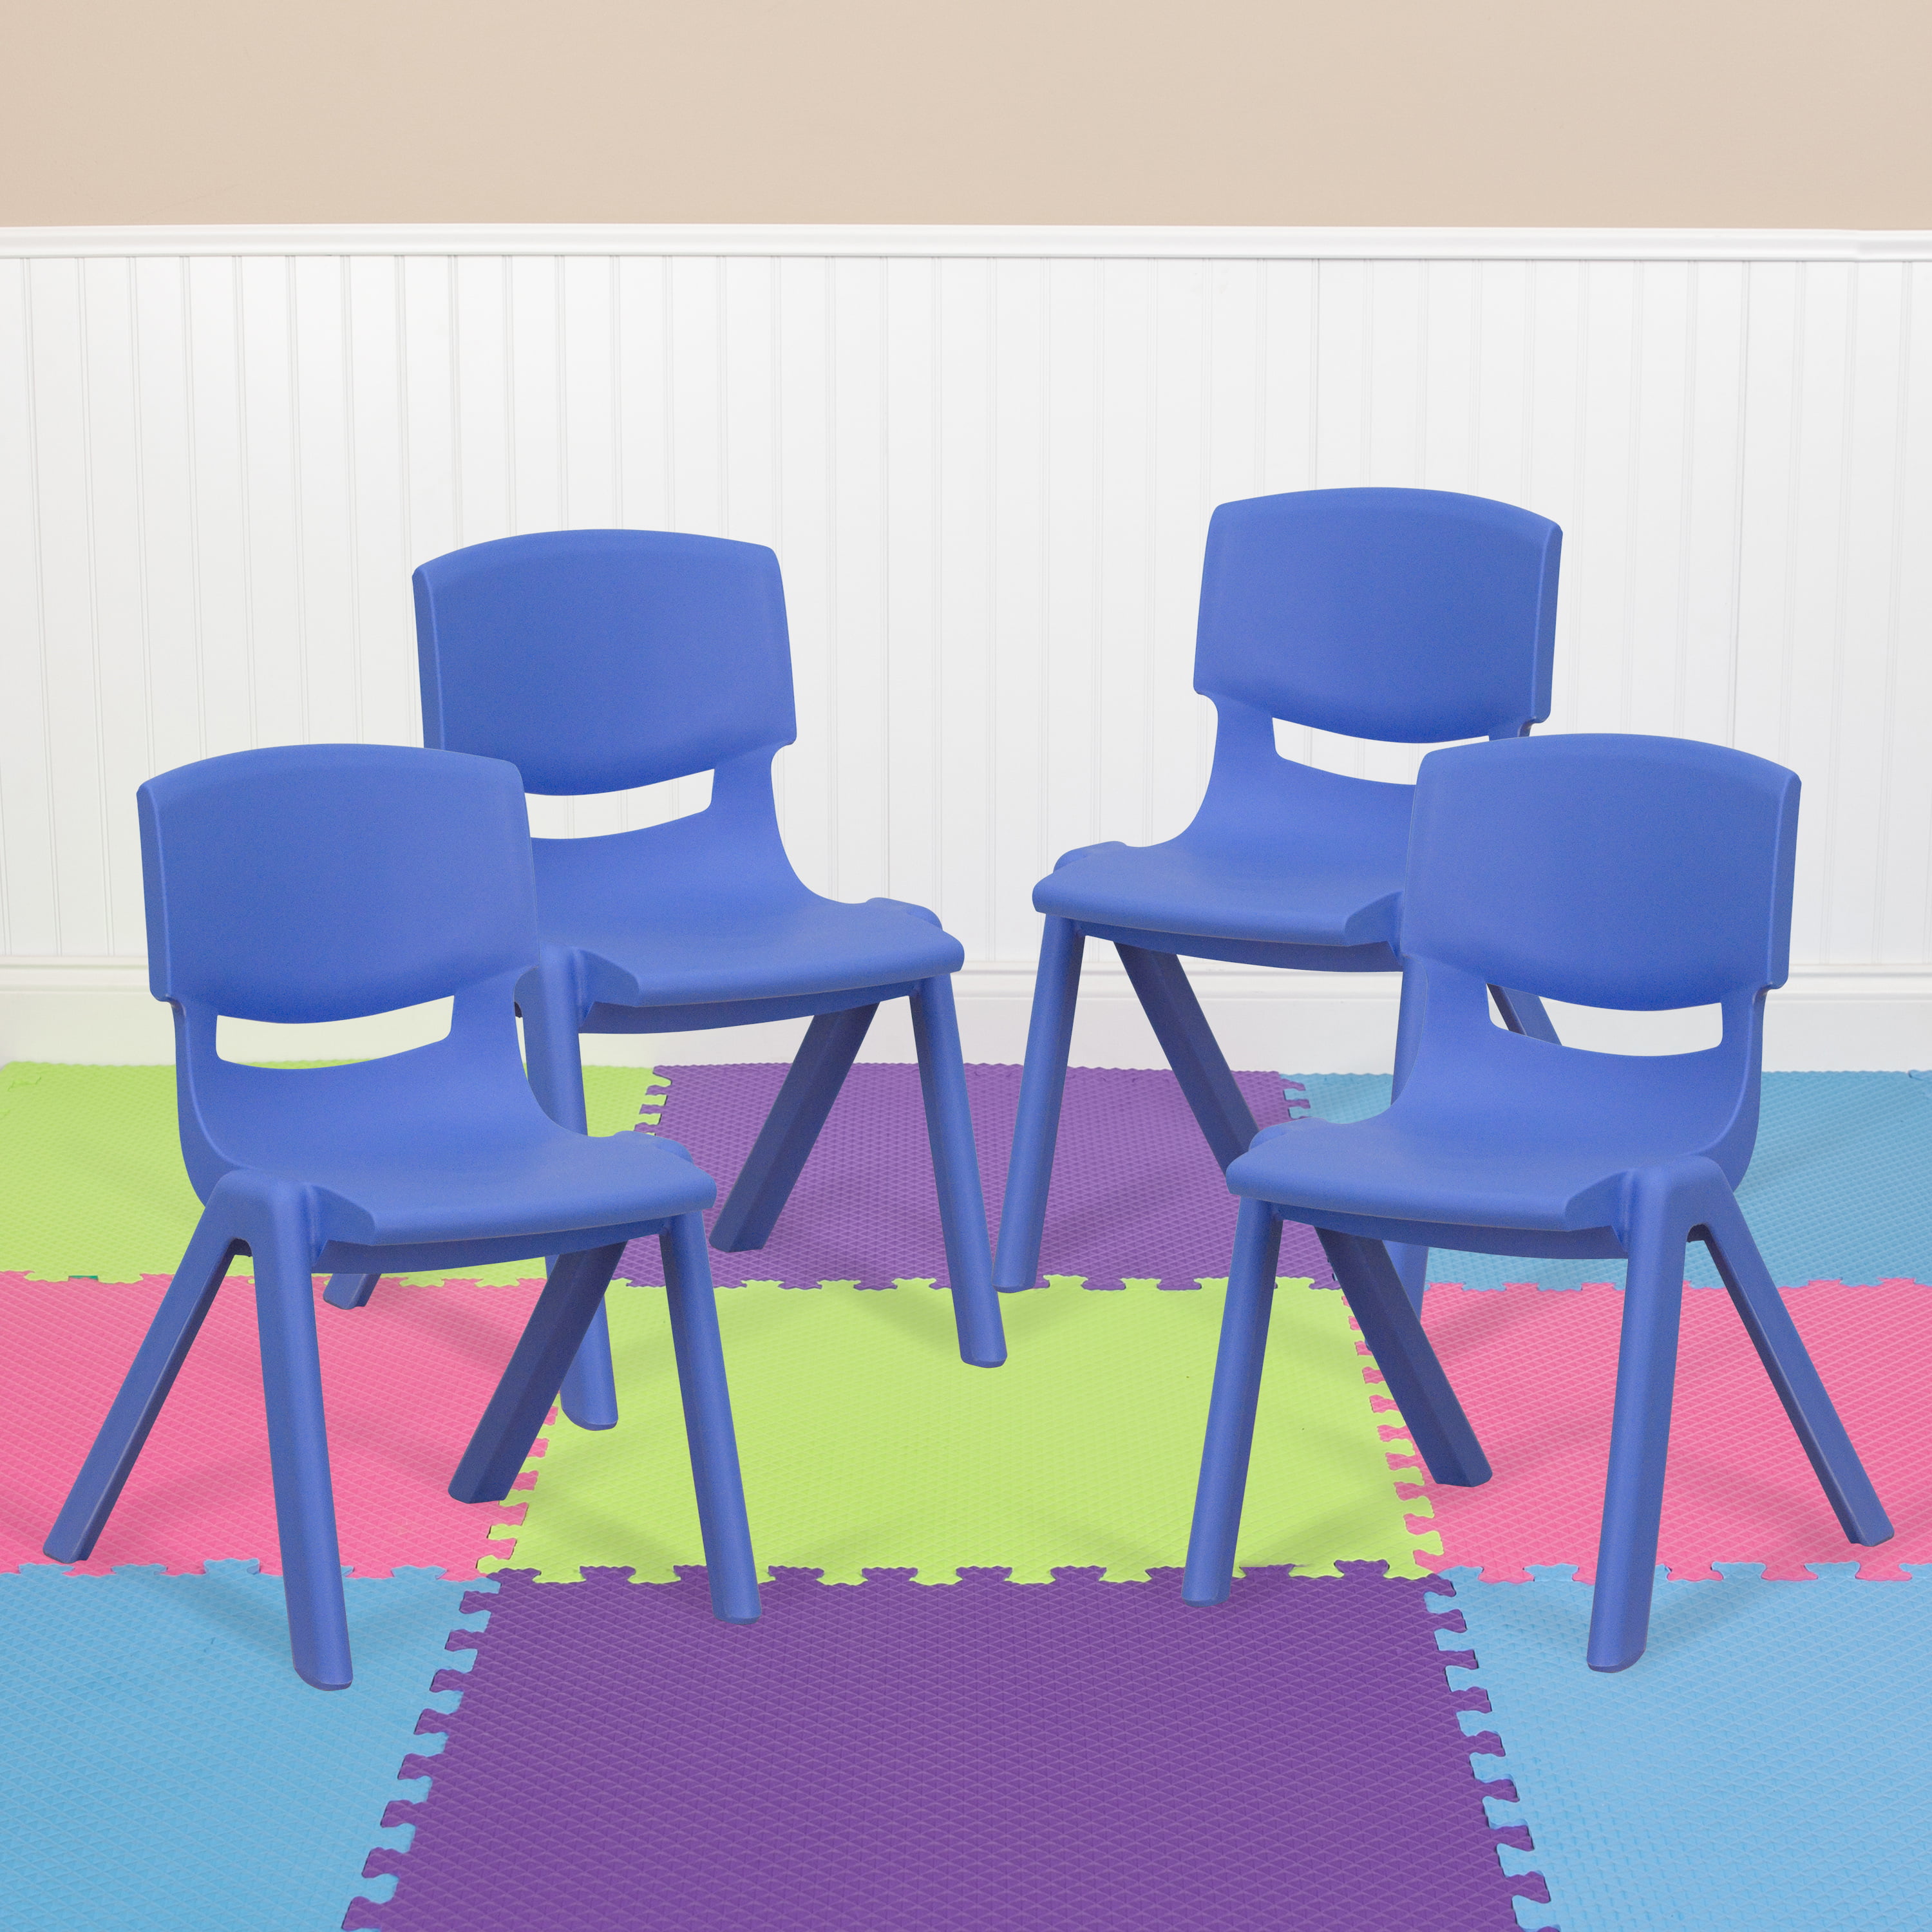 BizChair 4 Pack Natural Plastic Stackable School Chair with 13.25 Seat Height 